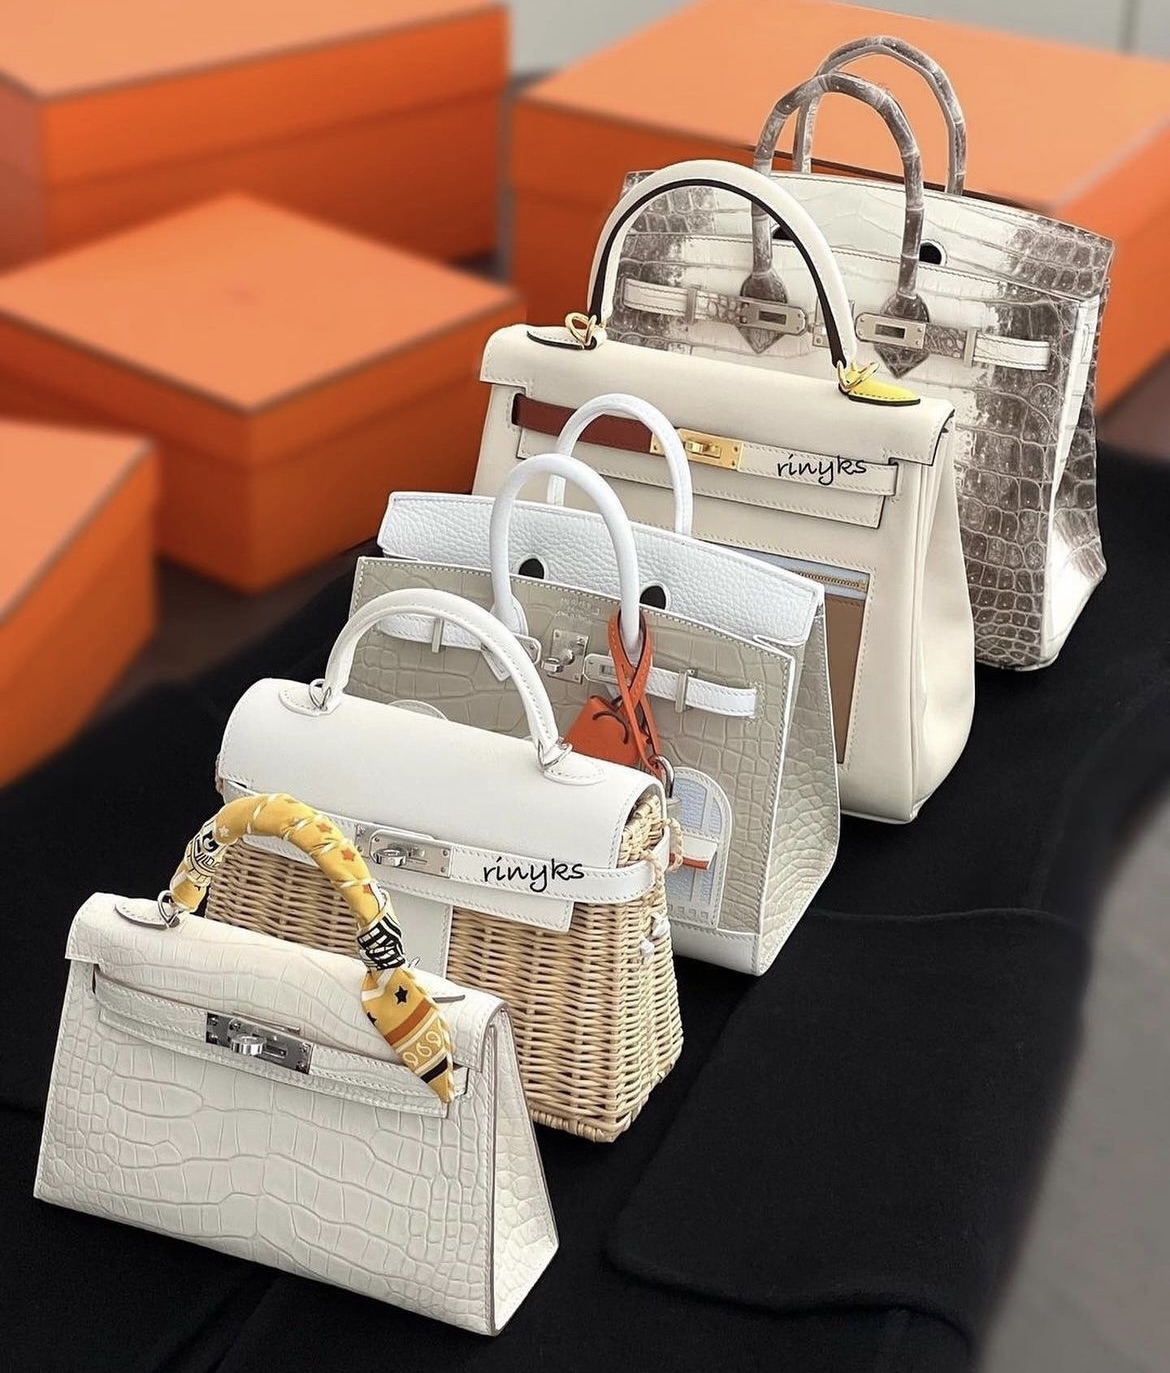 How Do I Care For and Maintain My Luxury Handbags In the Best